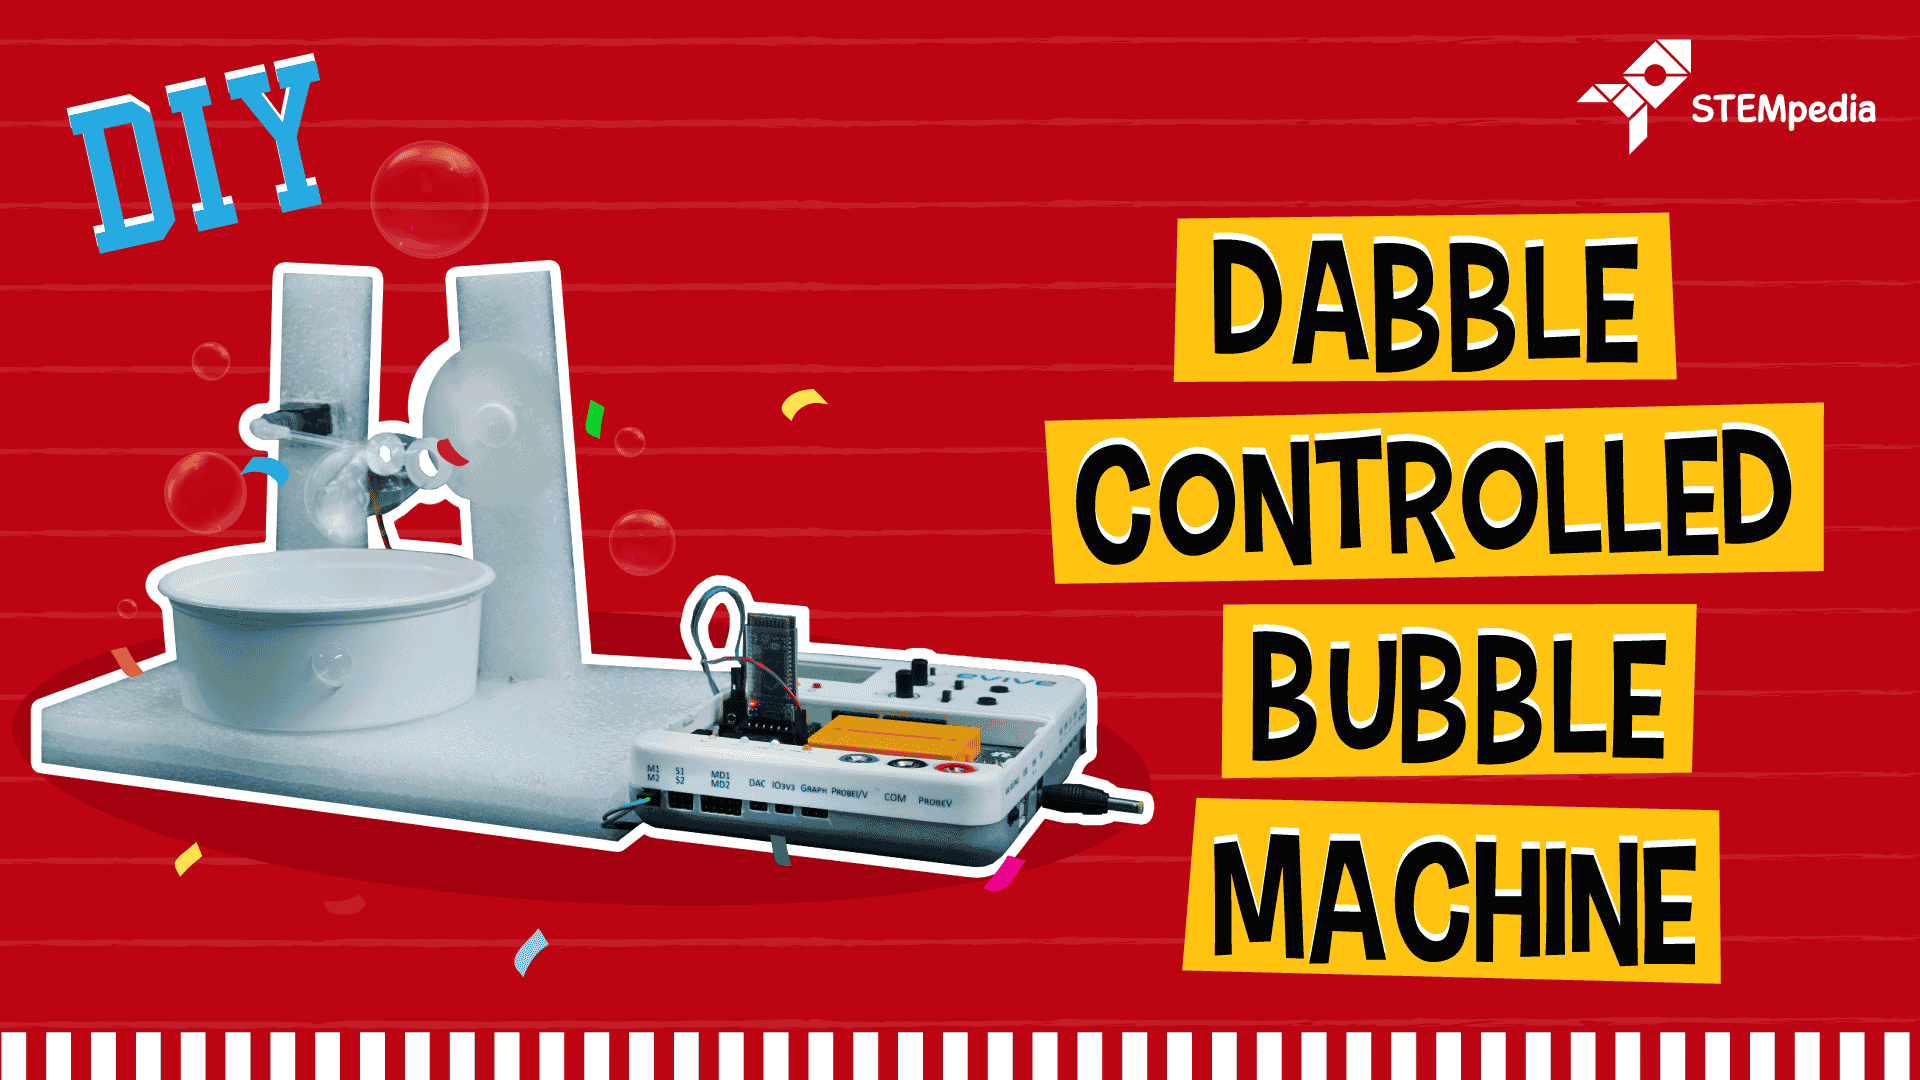 Dabble-Controlled-Bubble-Machine-STEAM-Project-for-Kids